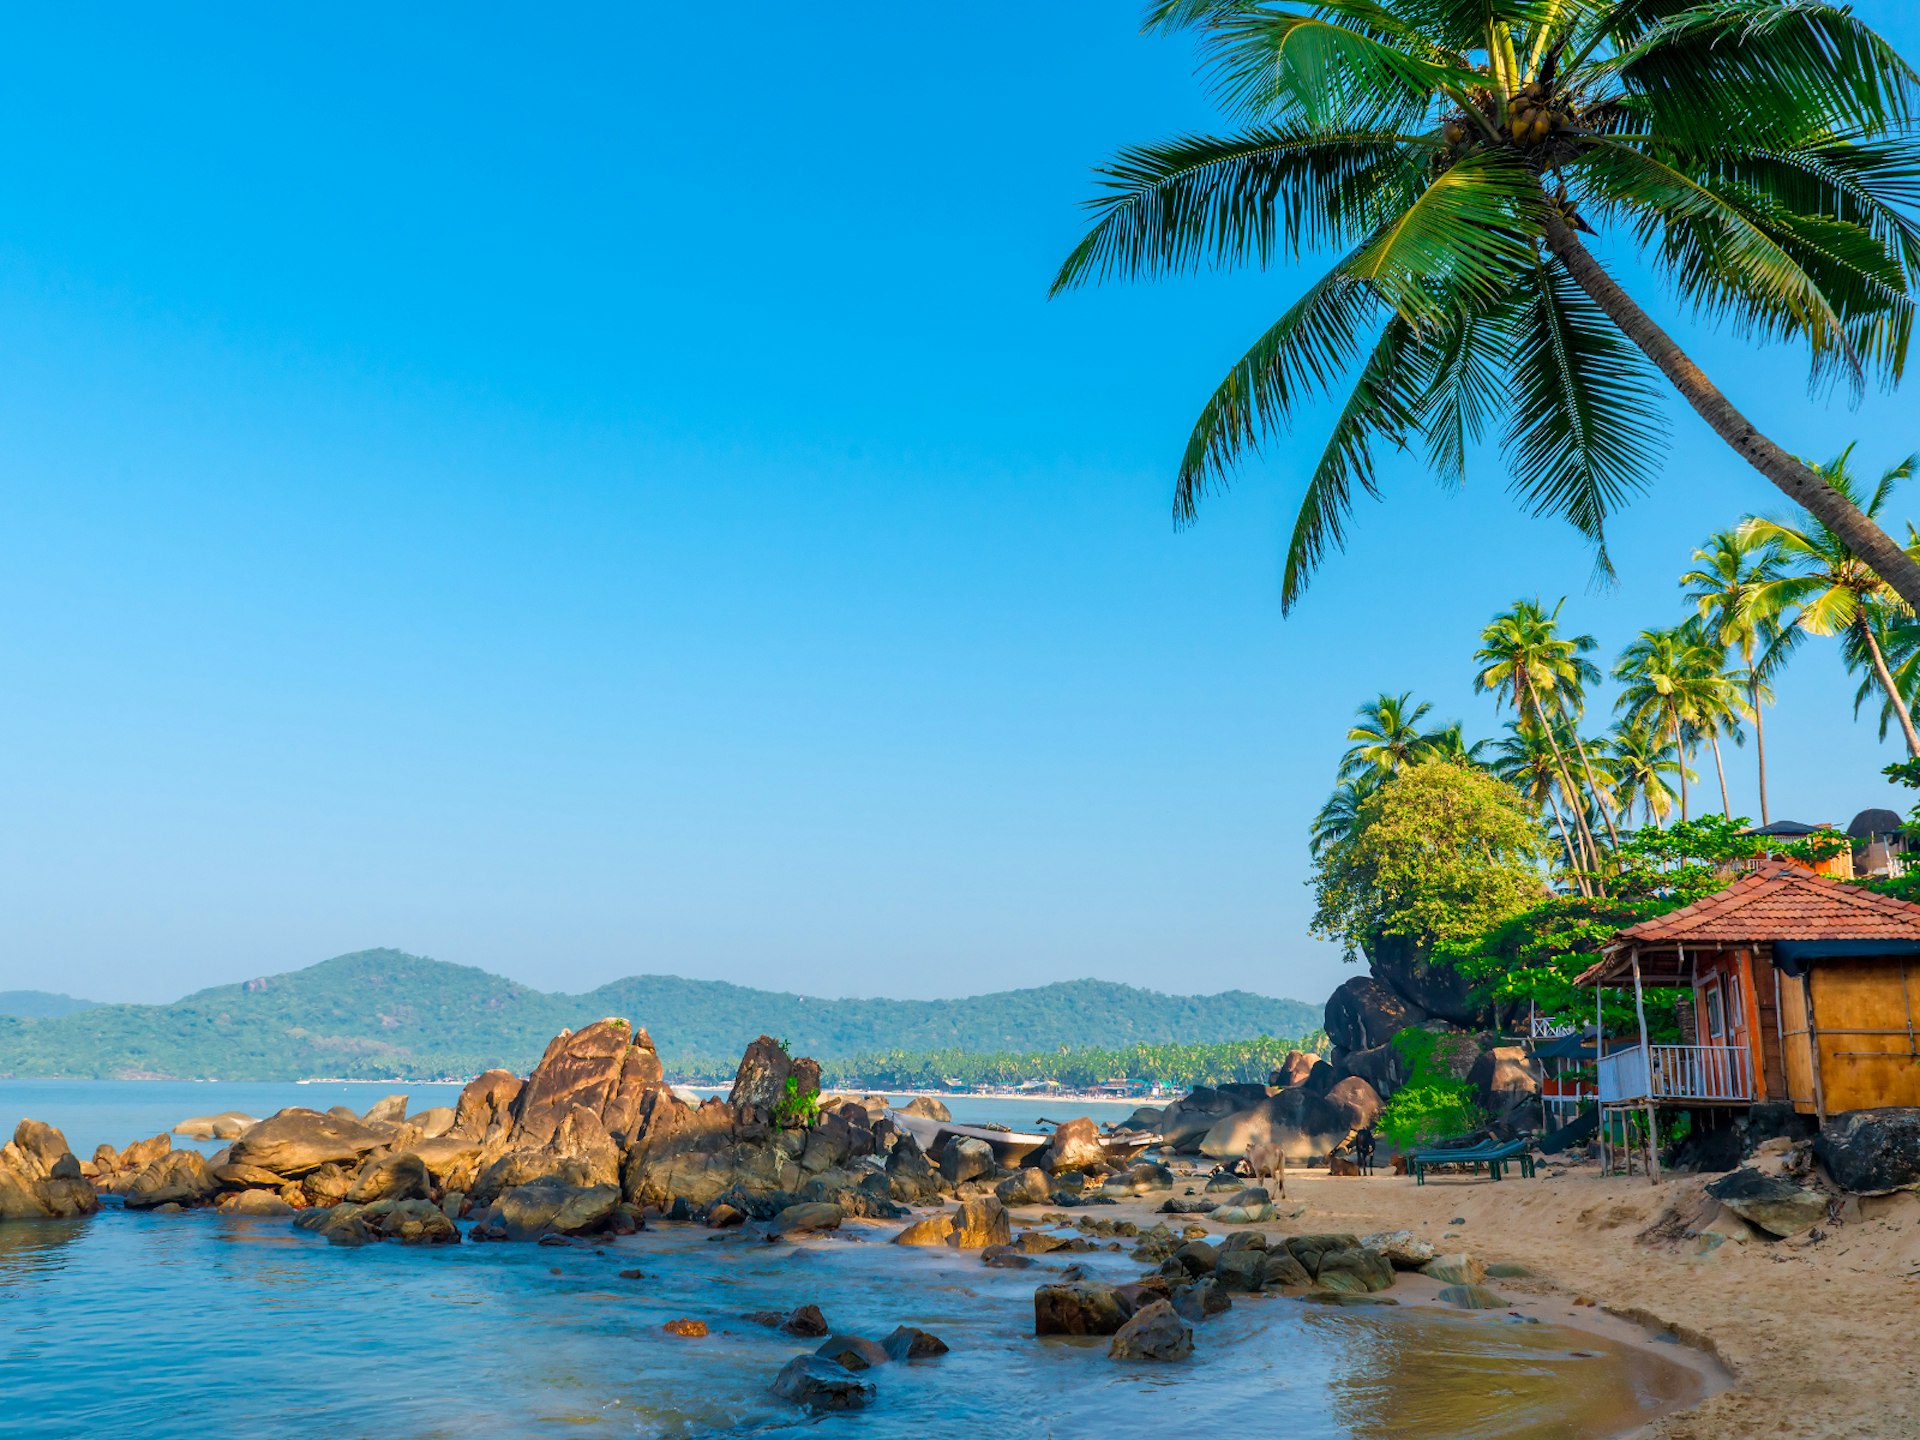 A beach in Goa, India with a beach hut, palm trees and a rocky outcrop leading into the ocean